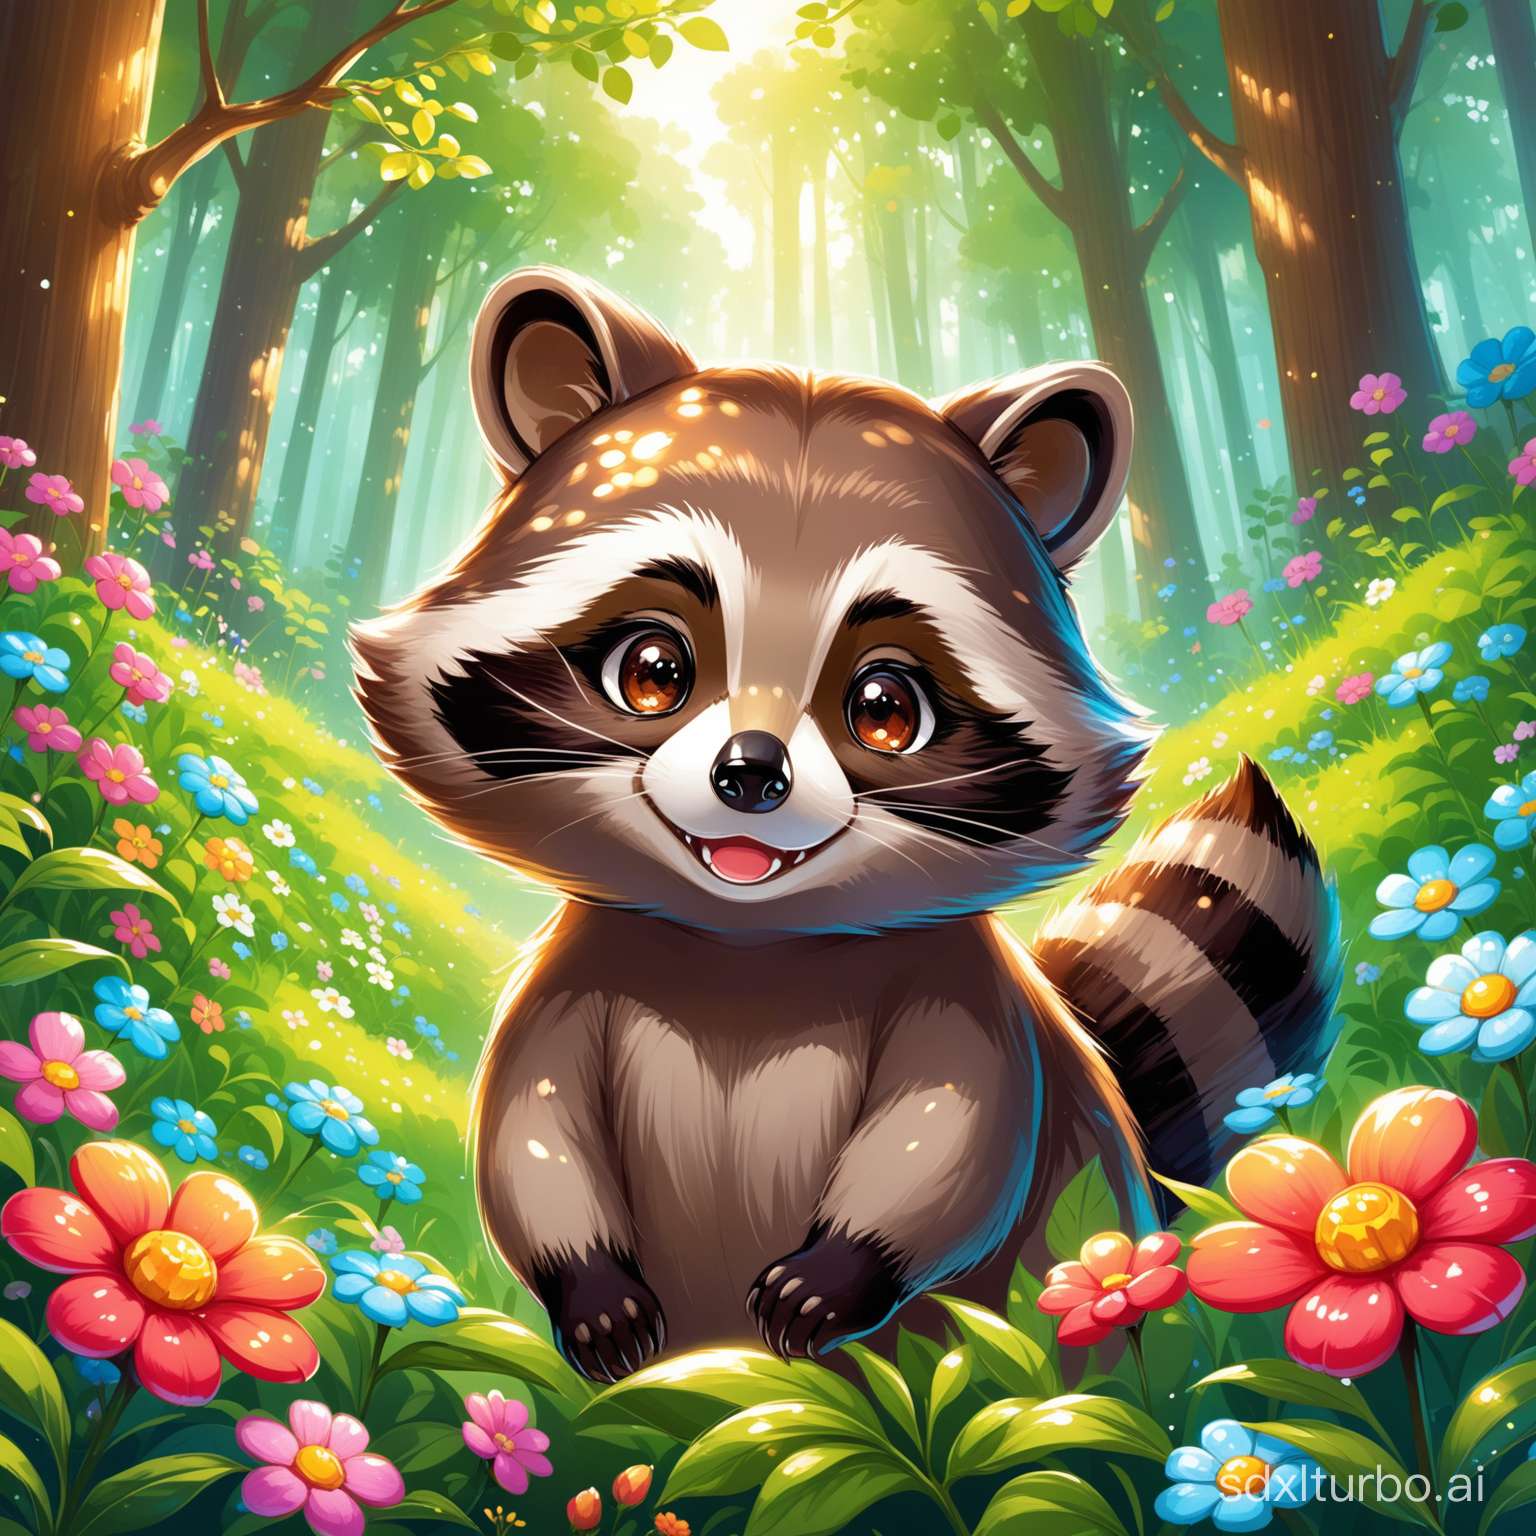 a cartoon raccoon portrait, flowers around, in forest, children painting, cg, fantasy, painting